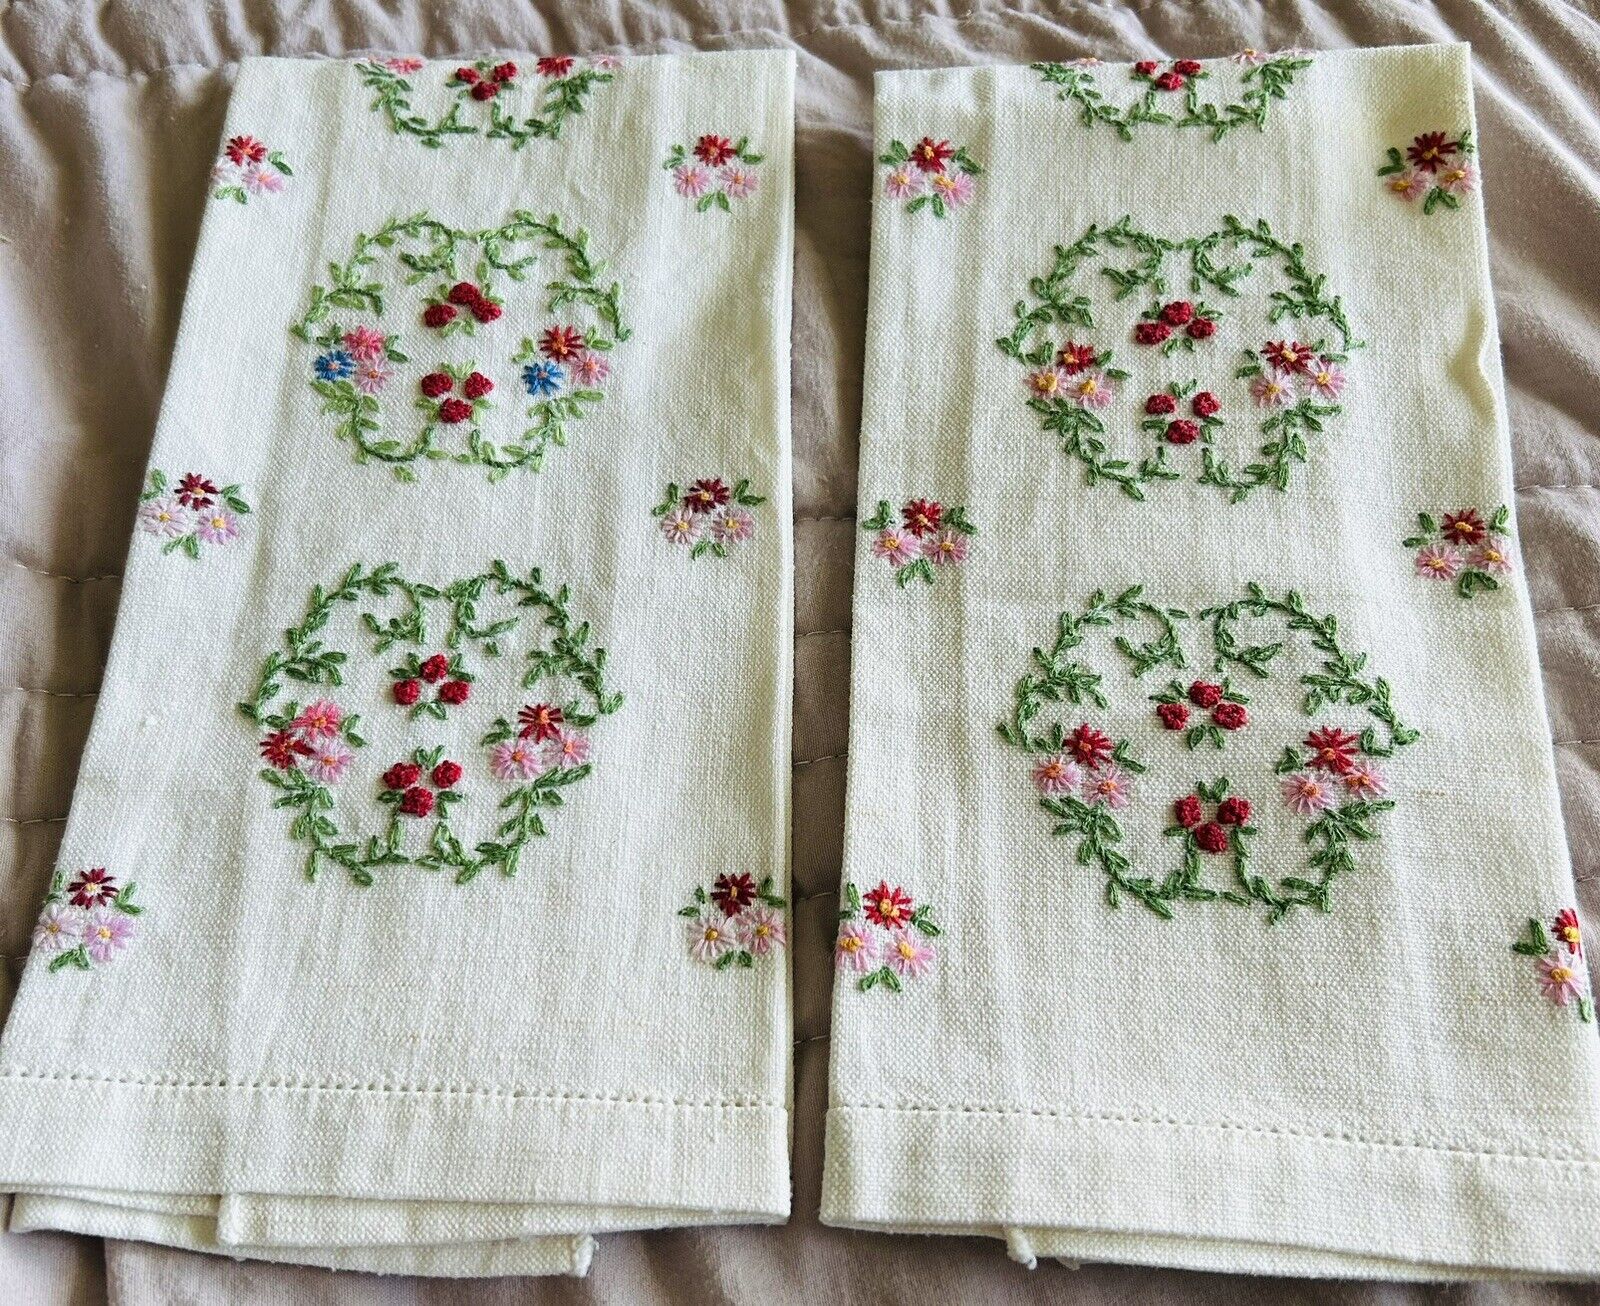 Vintage Hand embroidered linen towels new Ireland what could you bring them in h